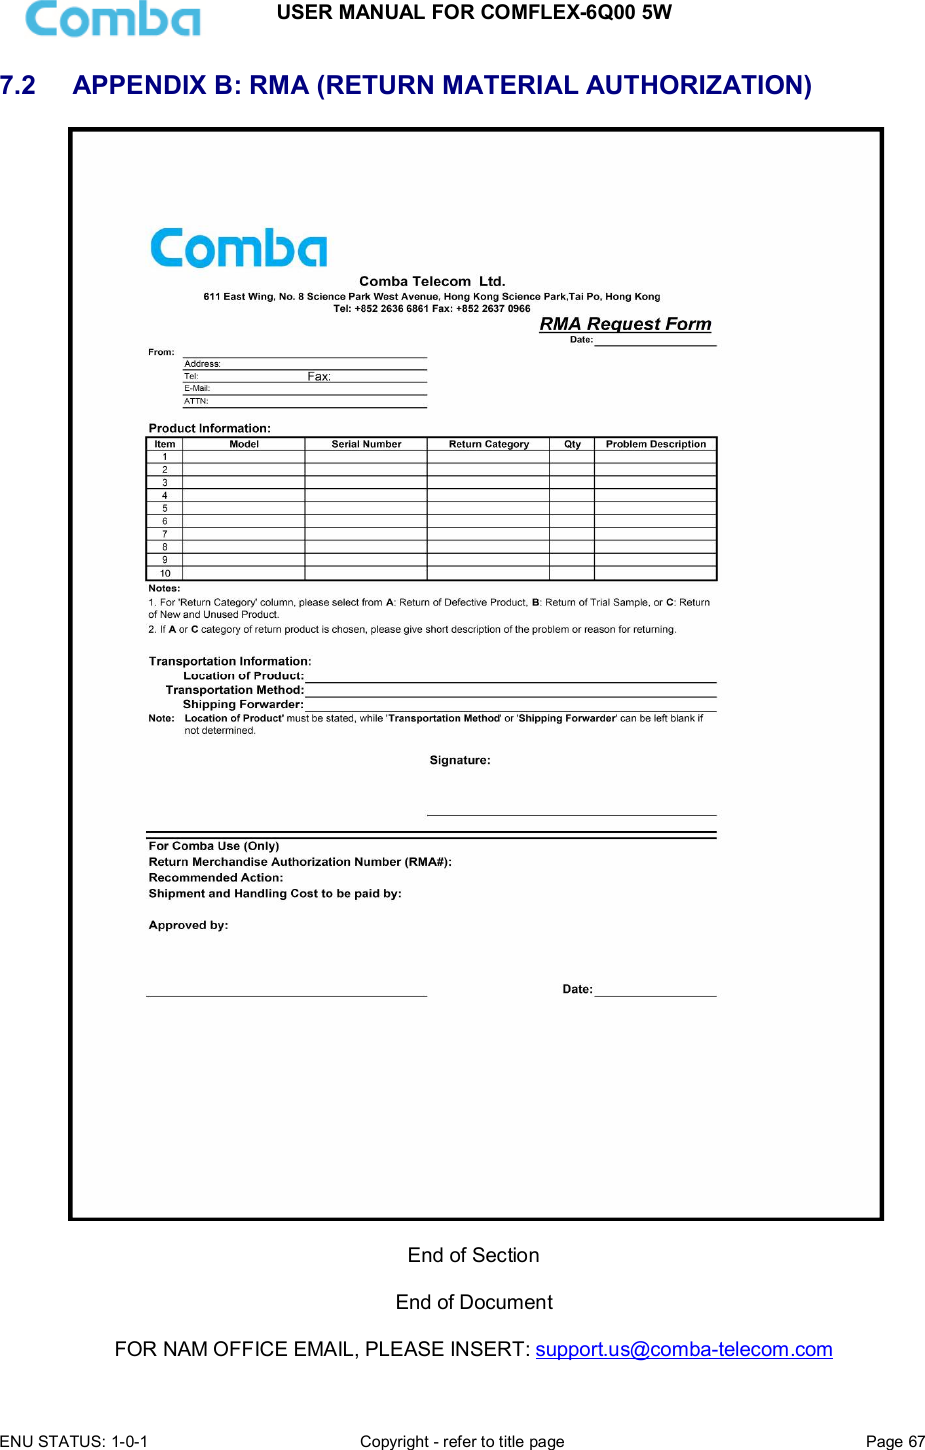 USER MANUAL FOR COMFLEX-6Q00 5W  ENU STATUS: 1-0-1  Copyright - refer to title page  Page 67      7.2  APPENDIX B: RMA (RETURN MATERIAL AUTHORIZATION)   End of Section  End of Document  FOR NAM OFFICE EMAIL, PLEASE INSERT: support.us@comba-telecom.com  